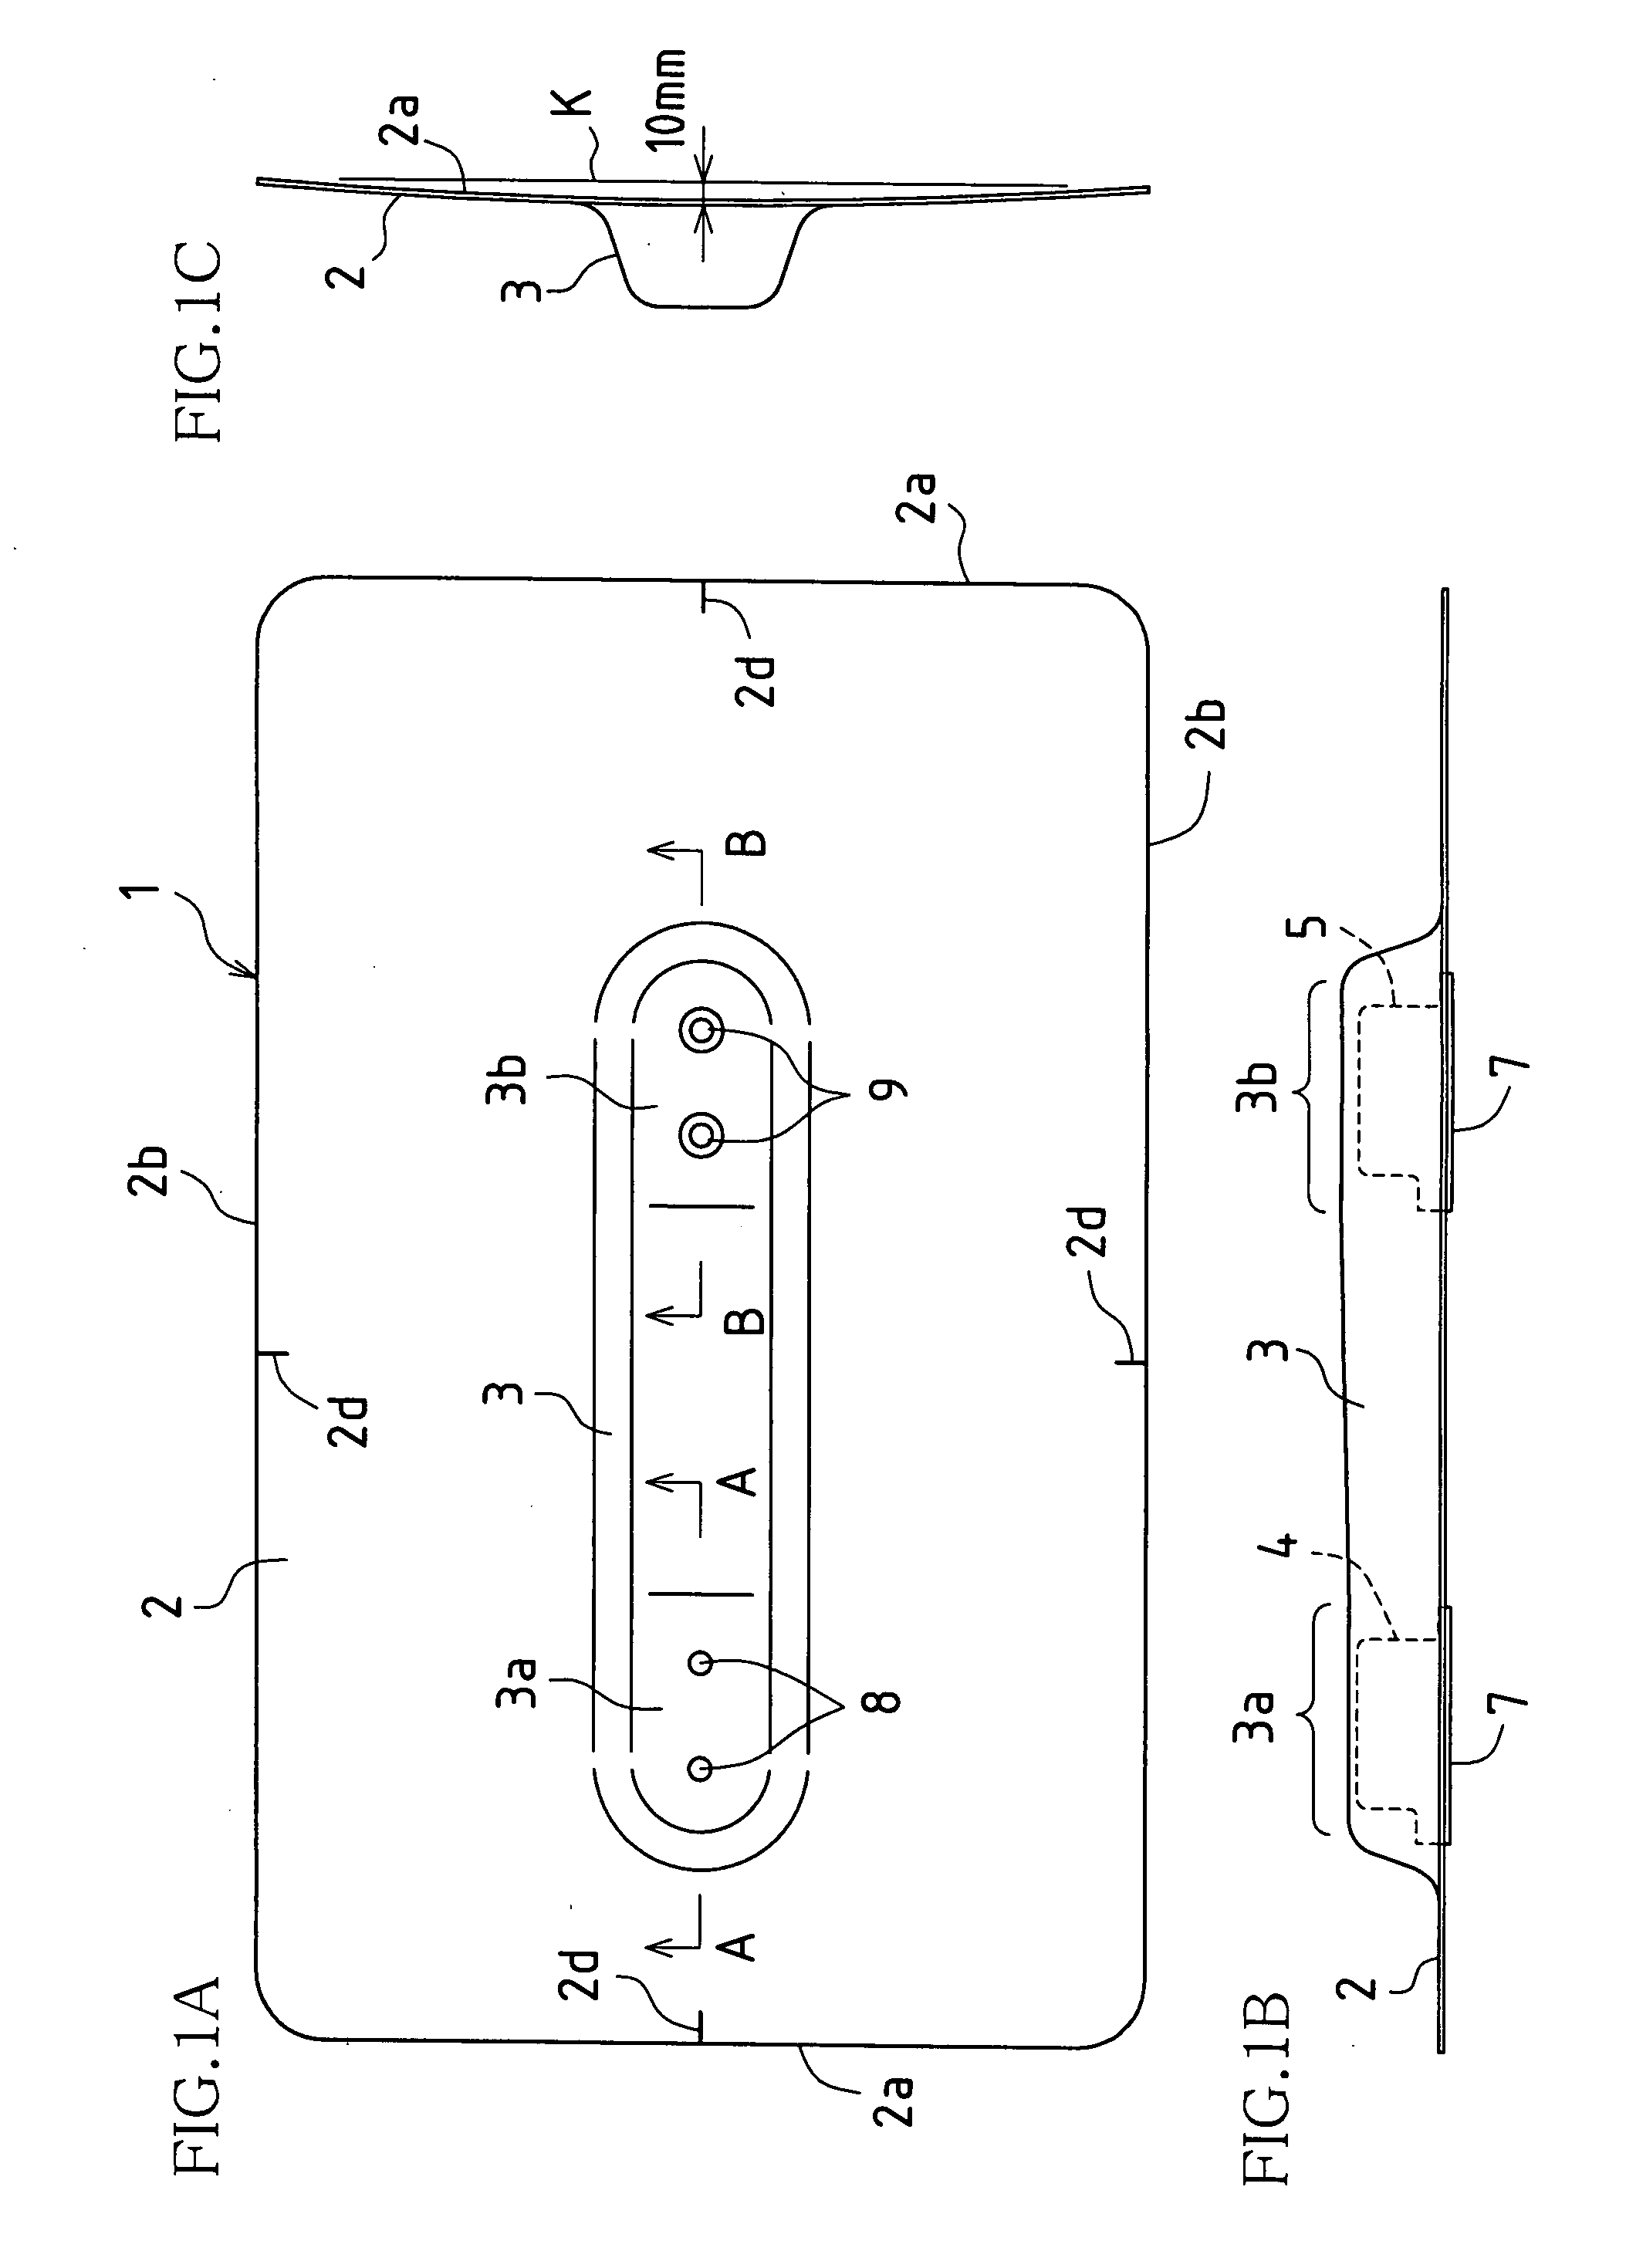 Structure support apparatus and structure installation method